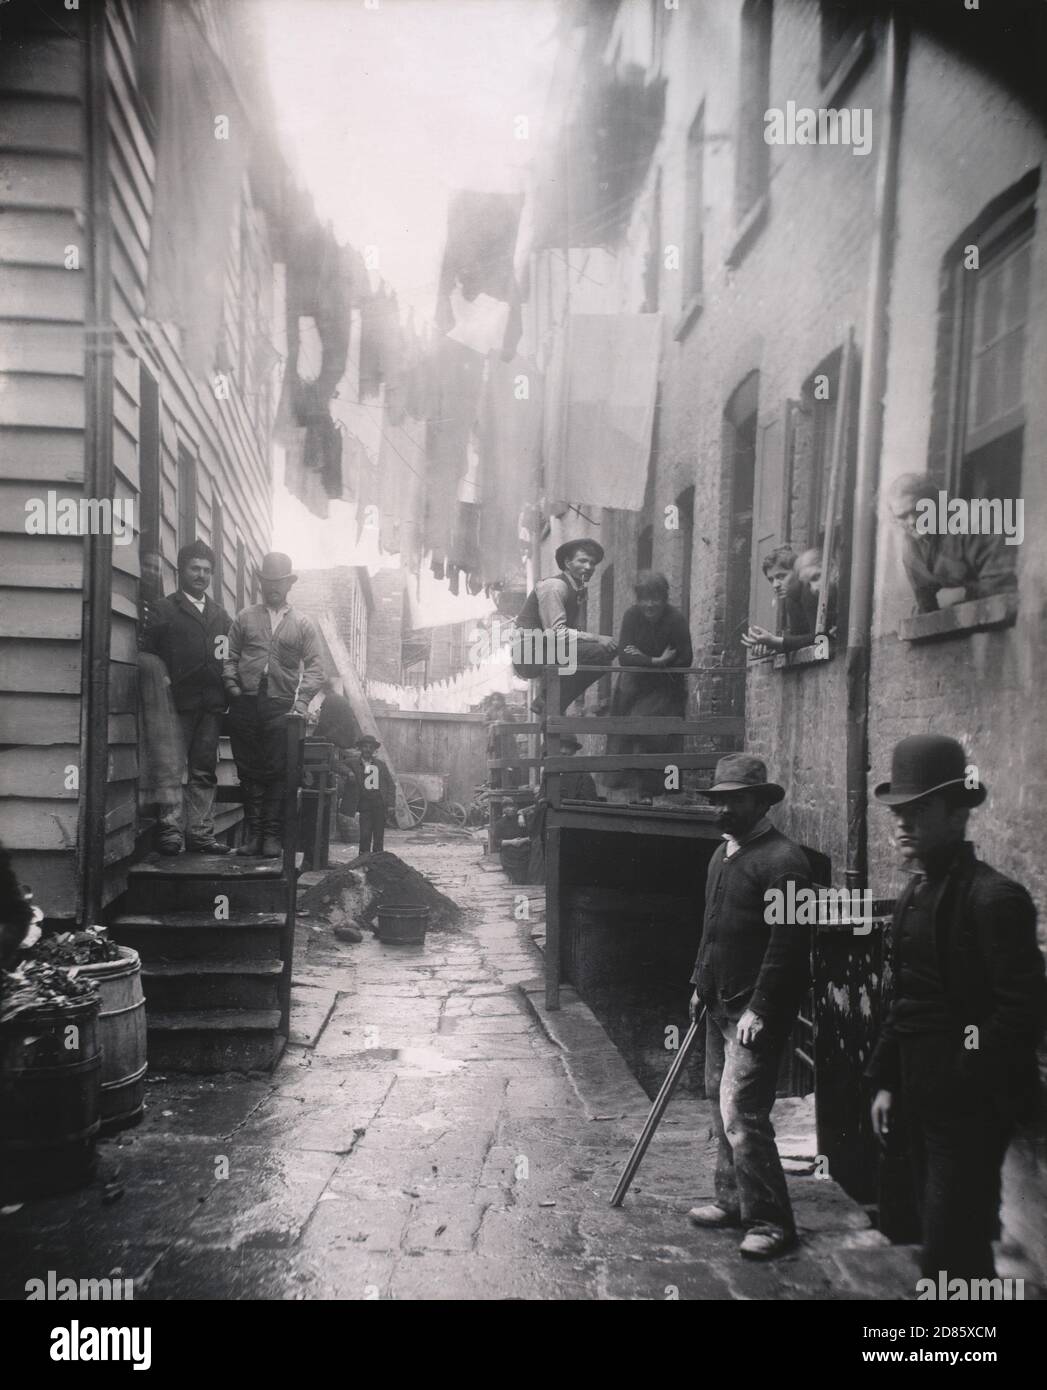 Vintage-Foto Jacob August Riis - Bandits' Roost, 59 1 2 Mulberry Street NYC, New York City. 1888. Stockfoto